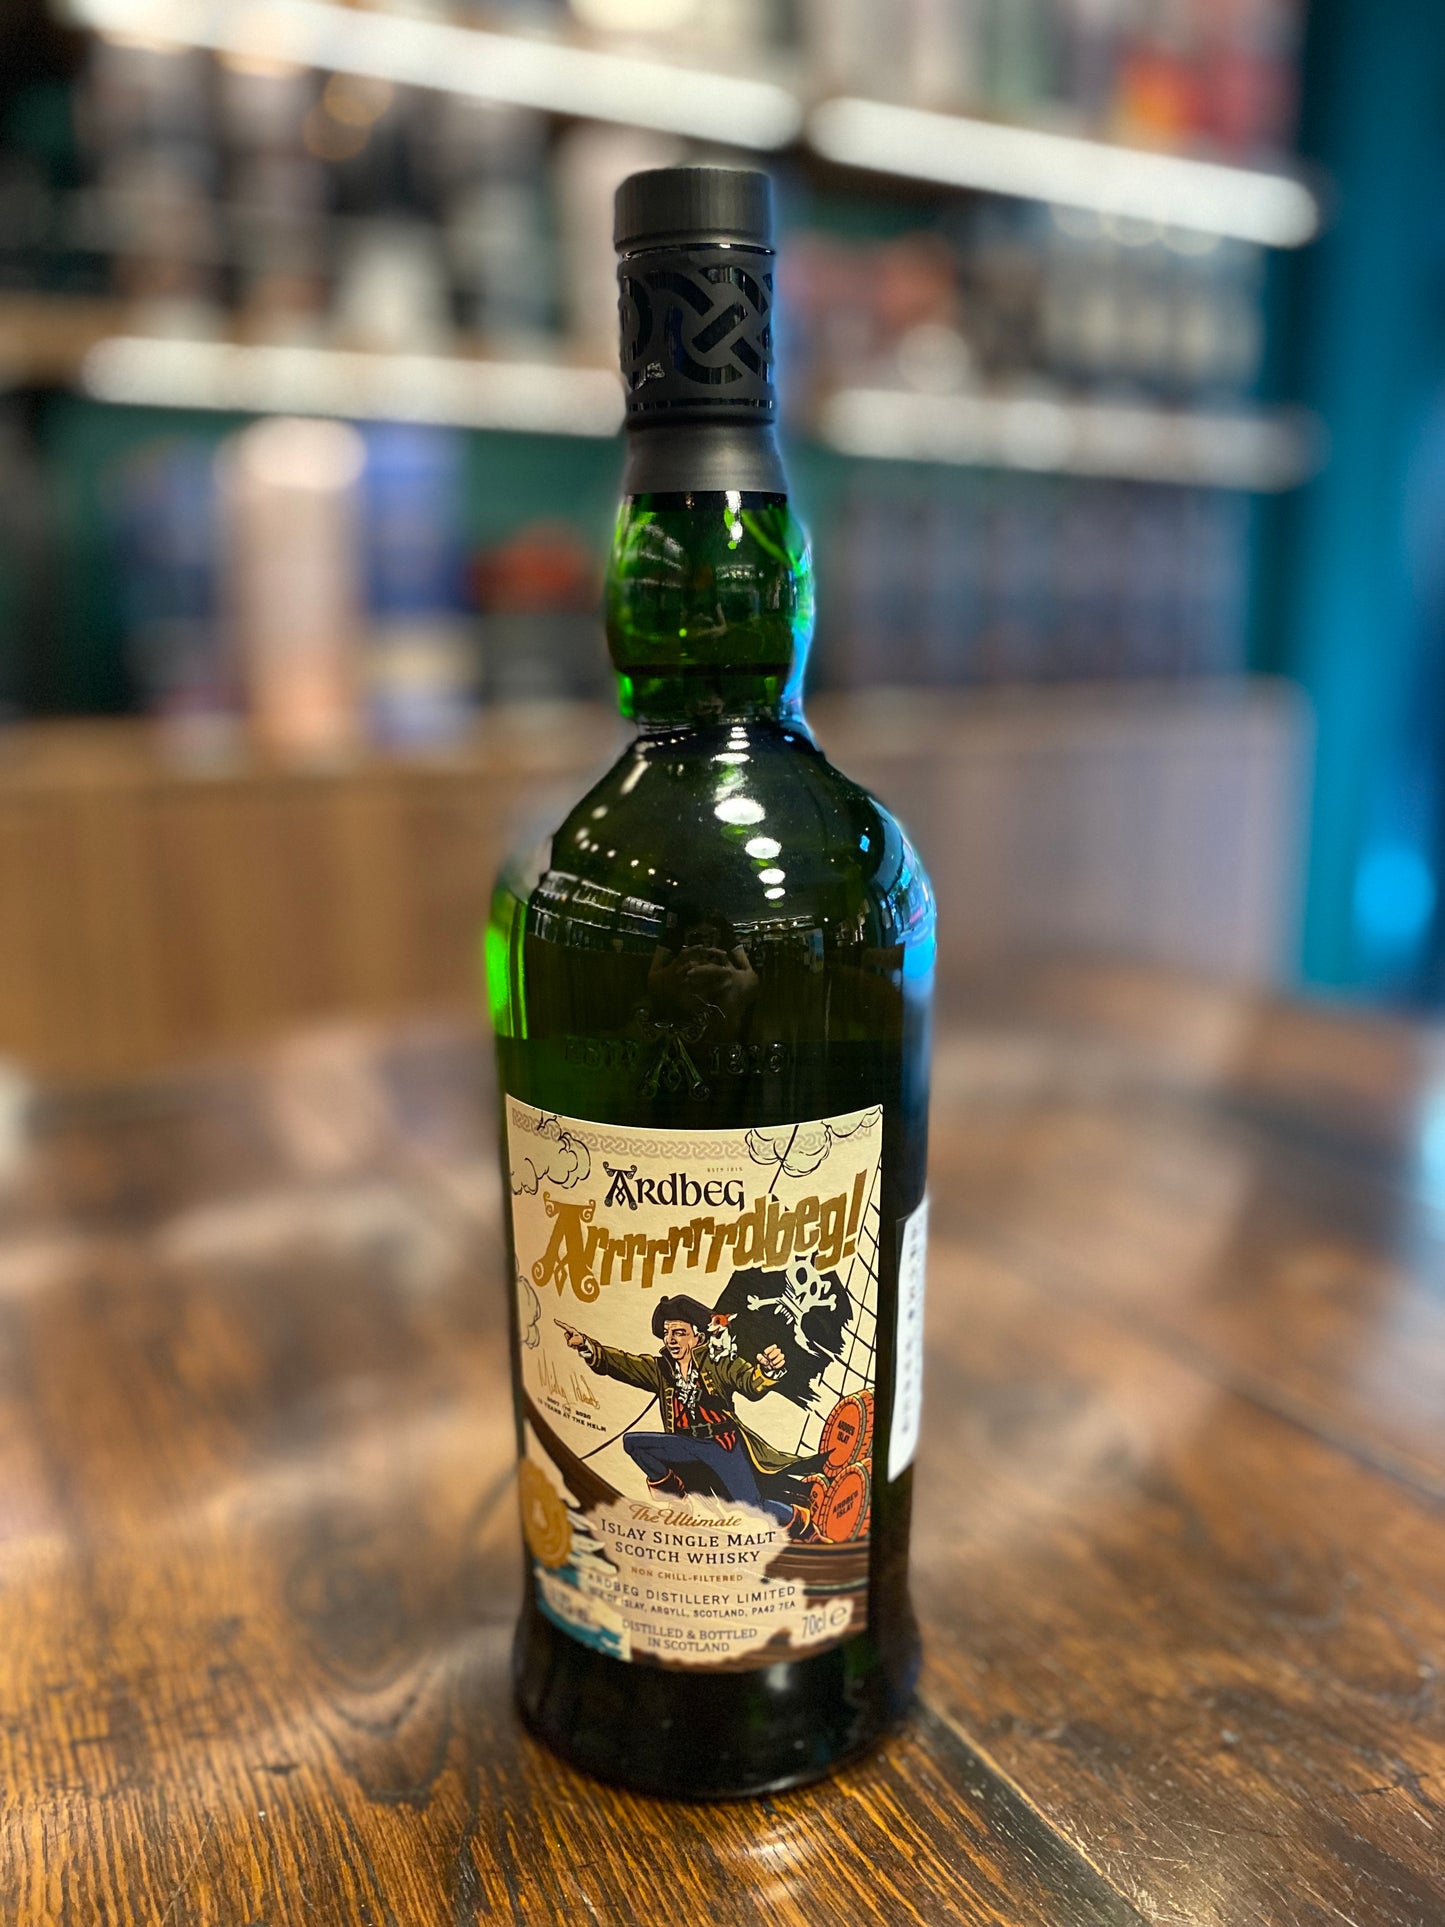 Ardbeg Qihang Limited Edition 700ml, 51.8% (without bottle) French version